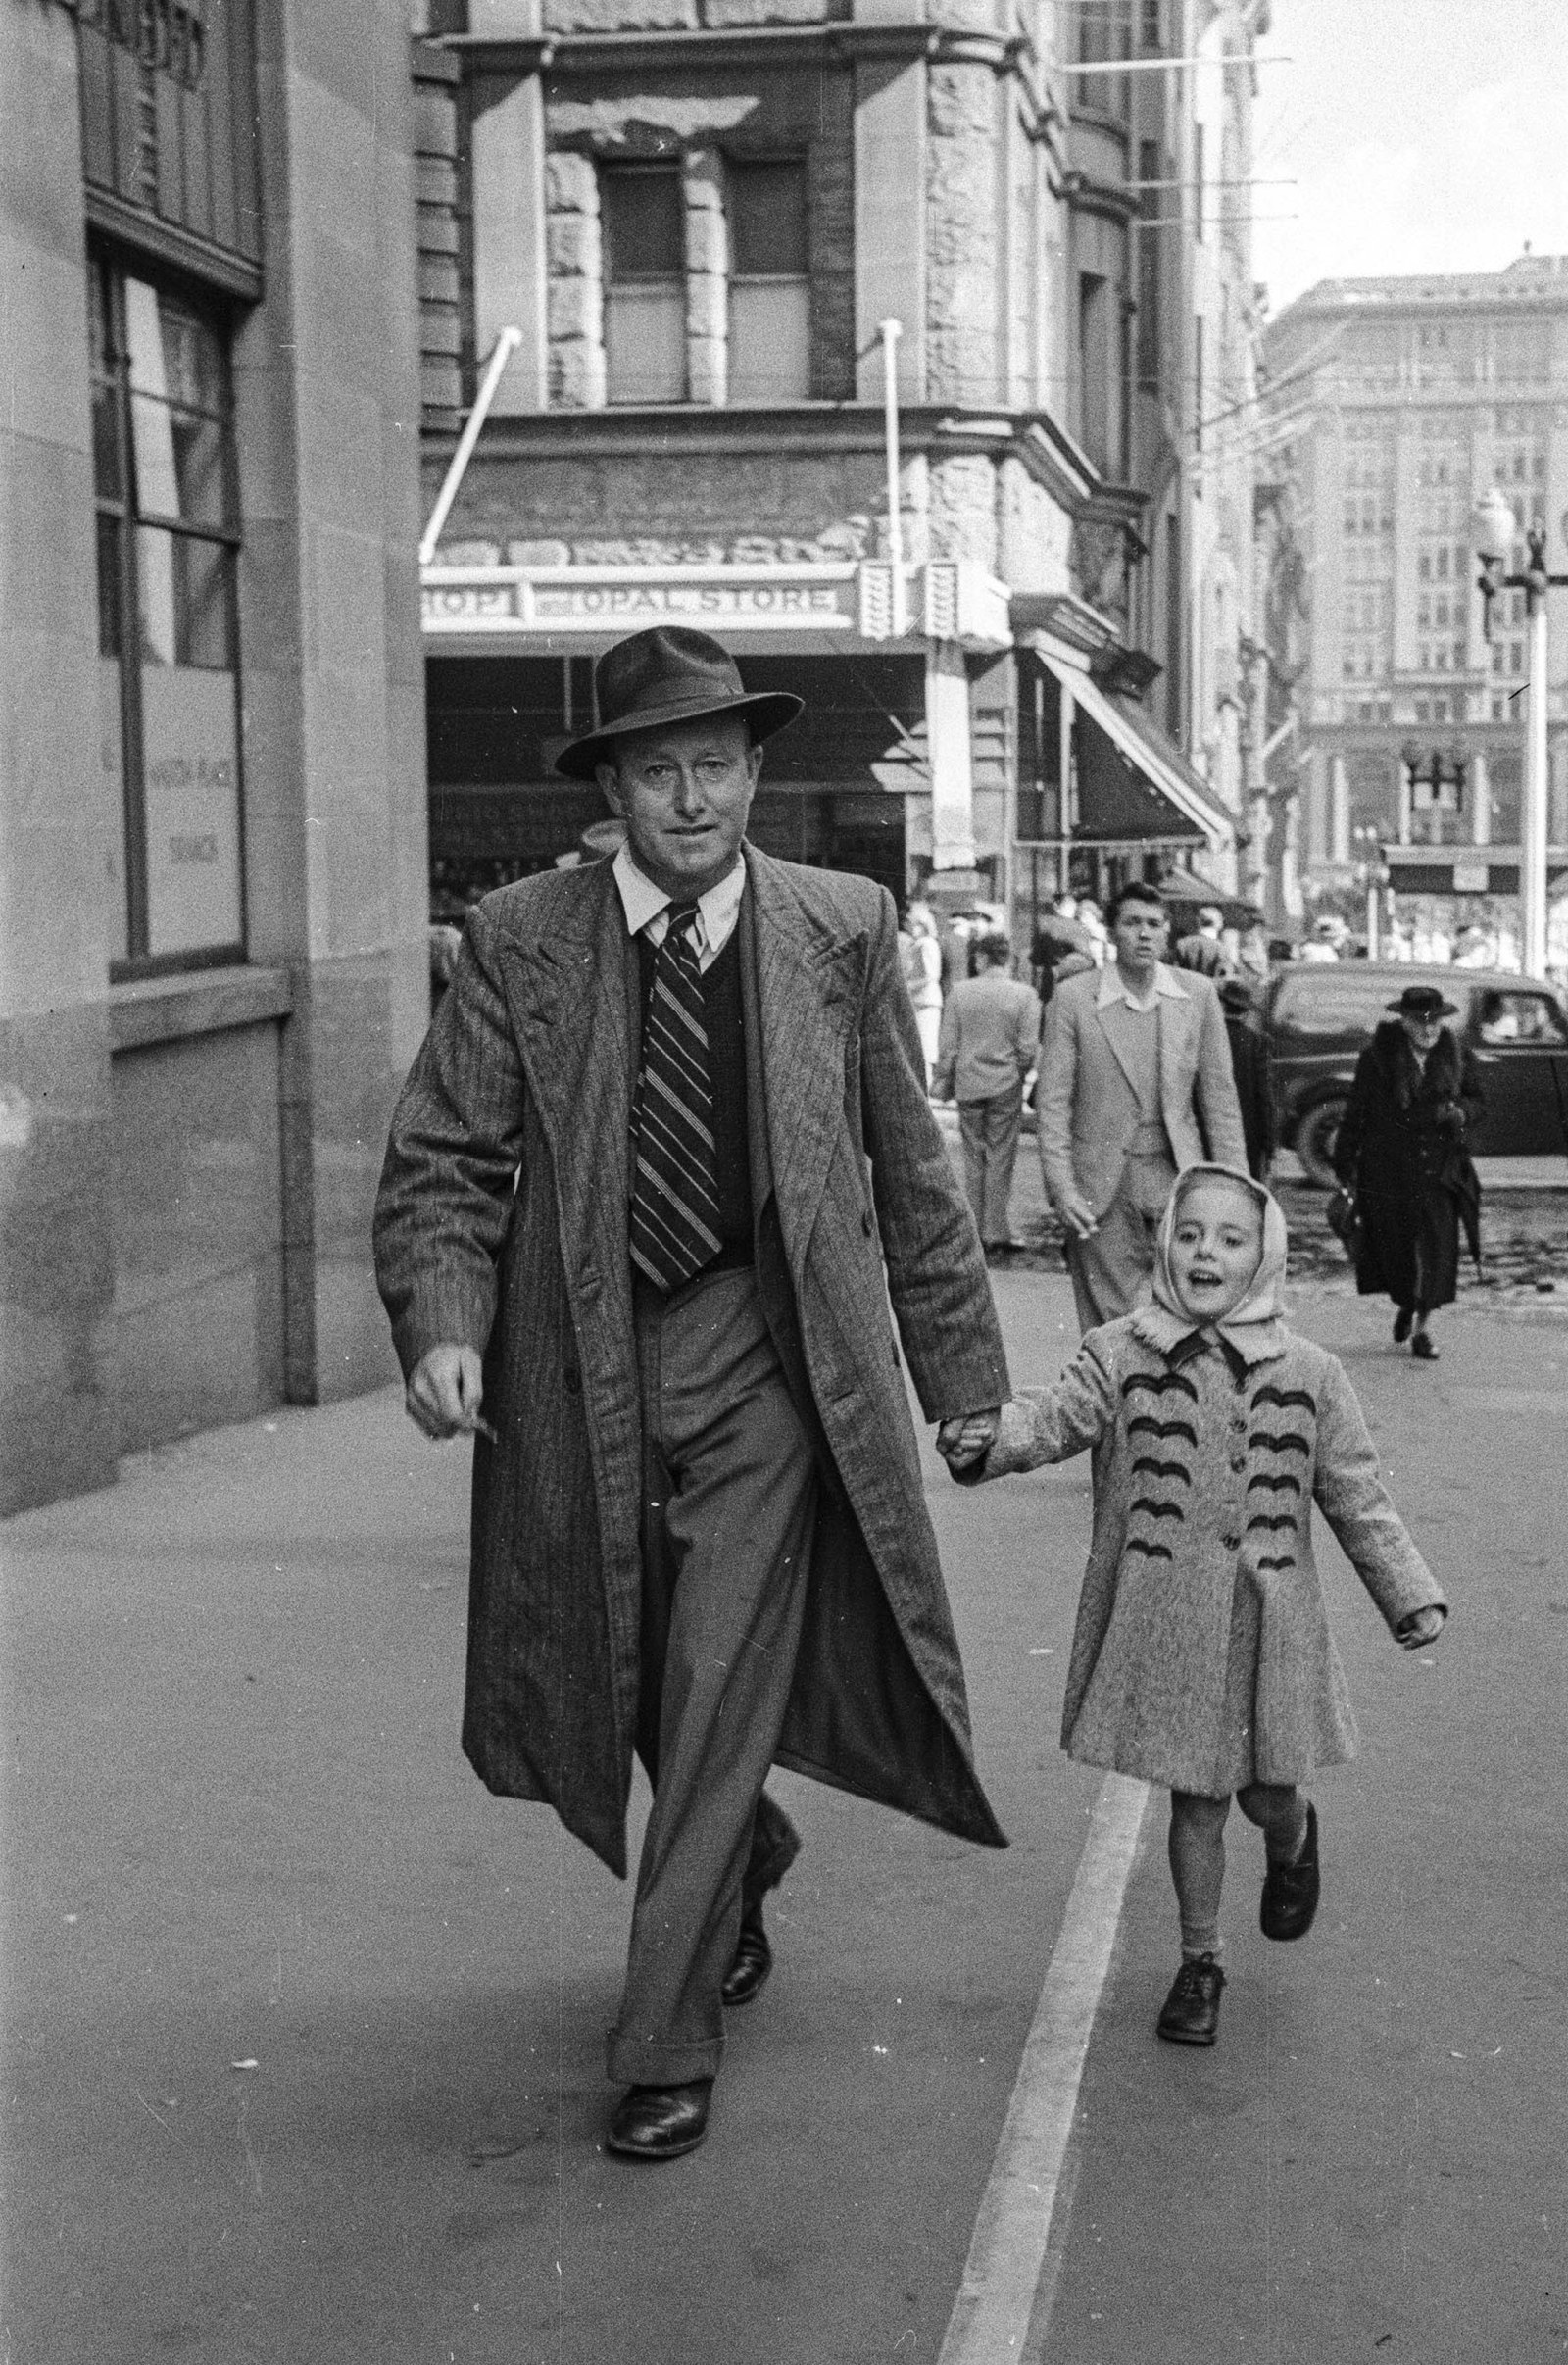 Black and white street photograph of pedestrians